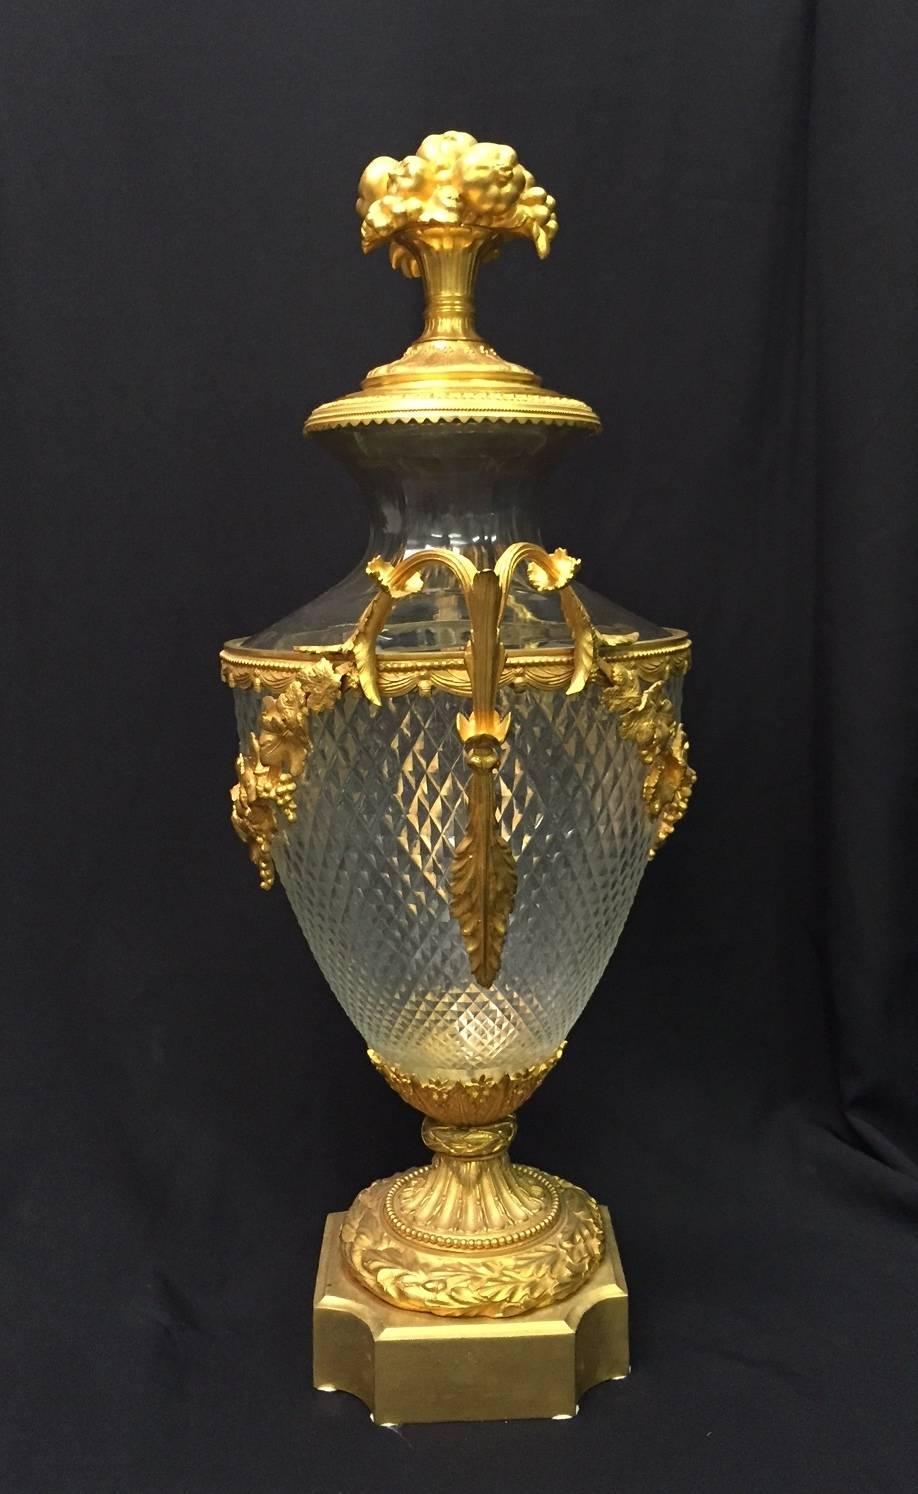 20th Century  French Ormolu-Mounted Cut Crystal Covered Urn